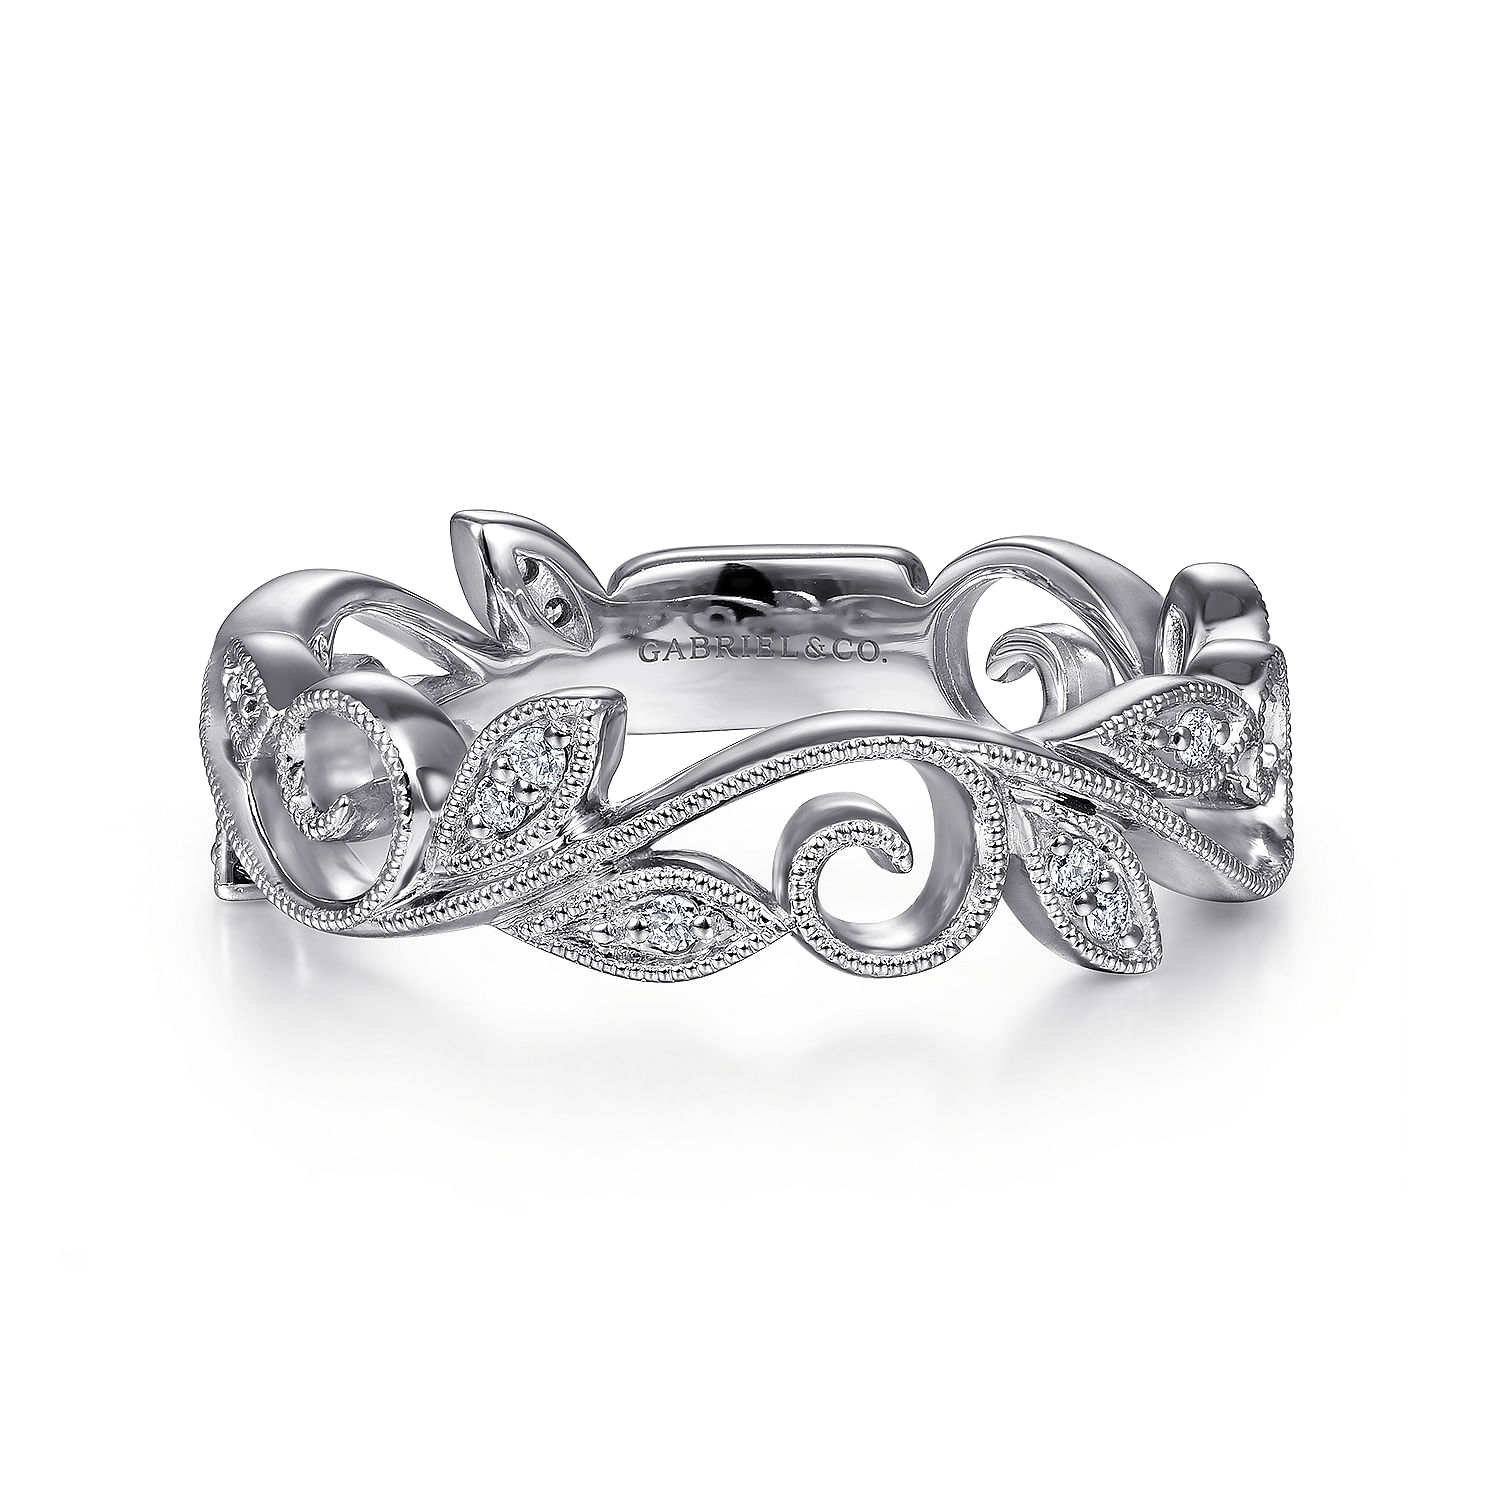 https://images.gabrielny.com/is/image/GabrielCo/Gabriel-14K-White-Gold-Scrolling-Floral-Diamond-Stackable-Ring~LR4593W45JJ-1.jpg